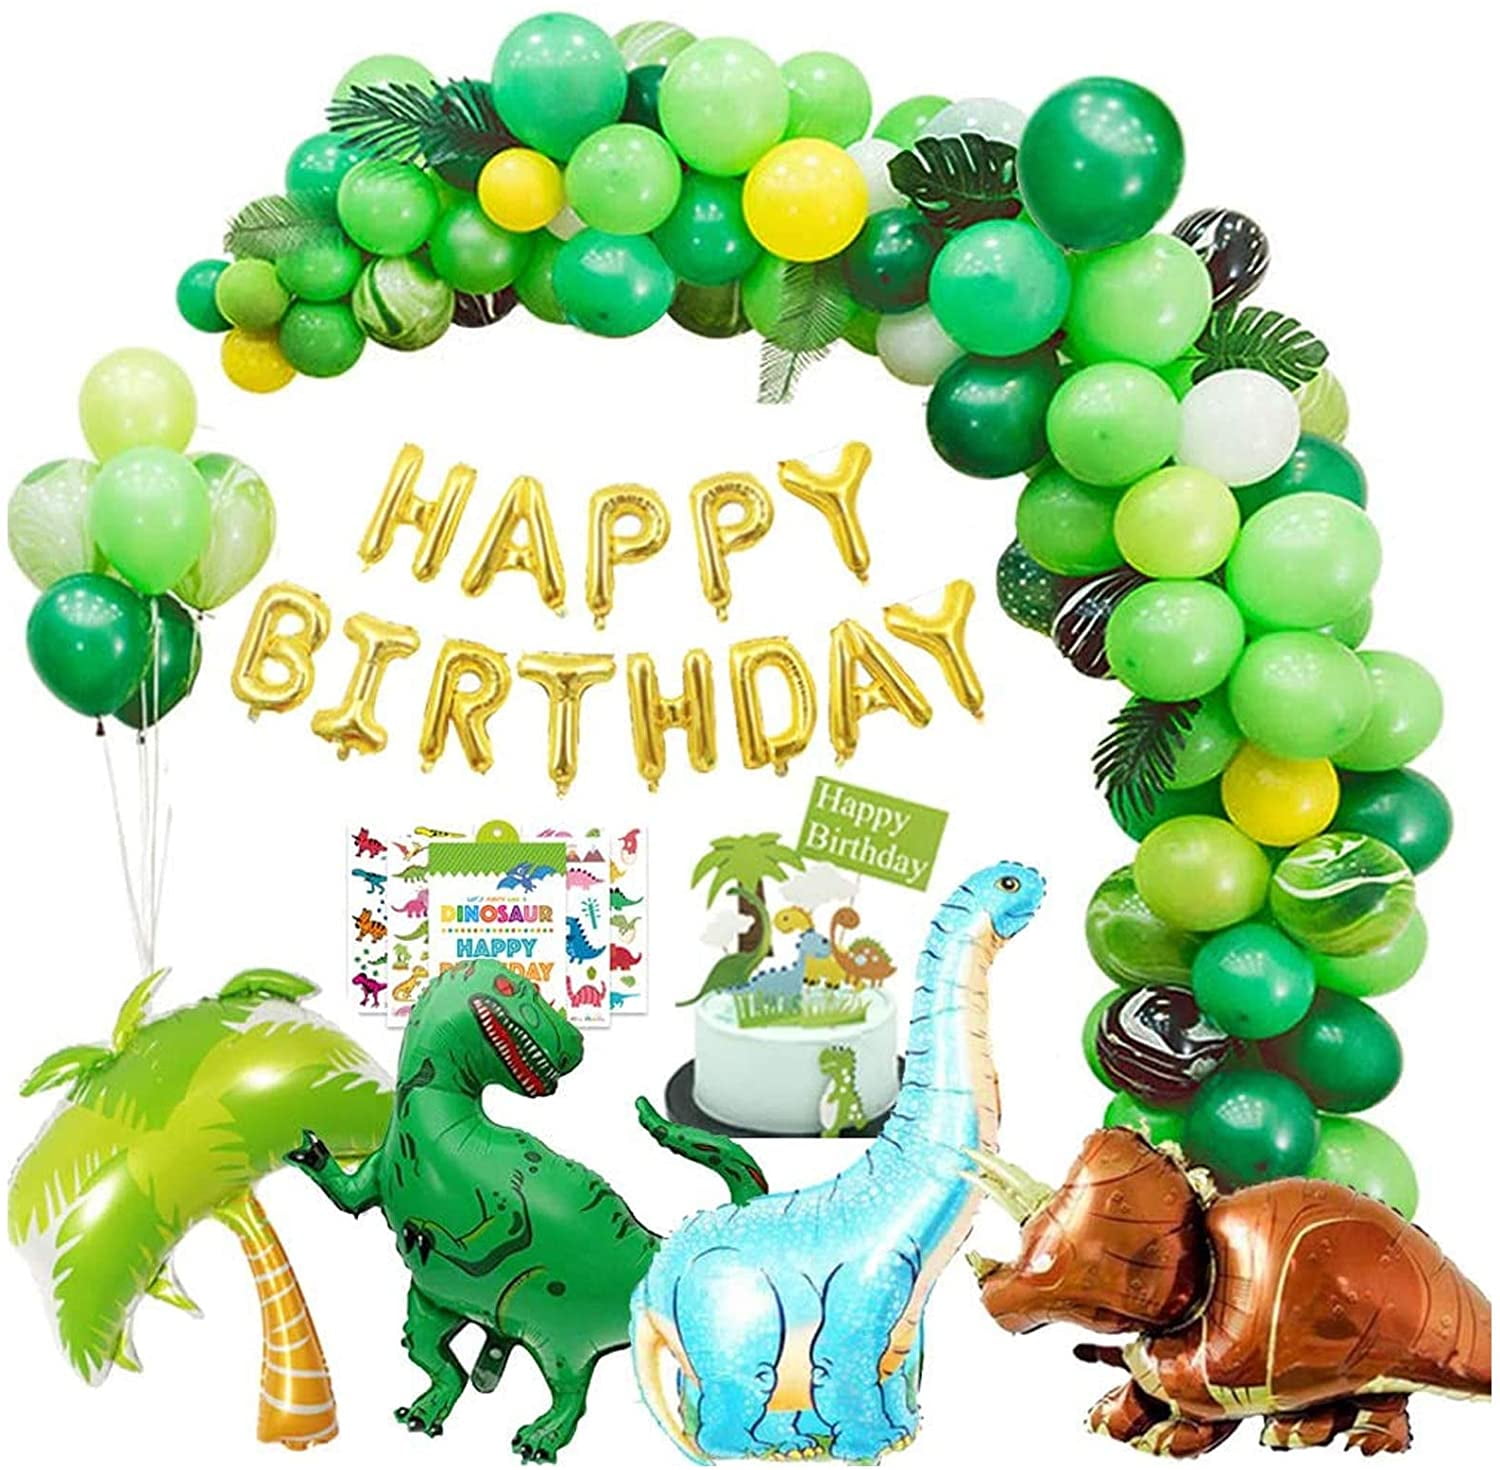 Details about   STICKER "AWESOME that you did!" for Gift Bags Childrens Birthday Dino ag Dino  data-mtsrclang=en-US href=# onclick=return false; 							show original title 